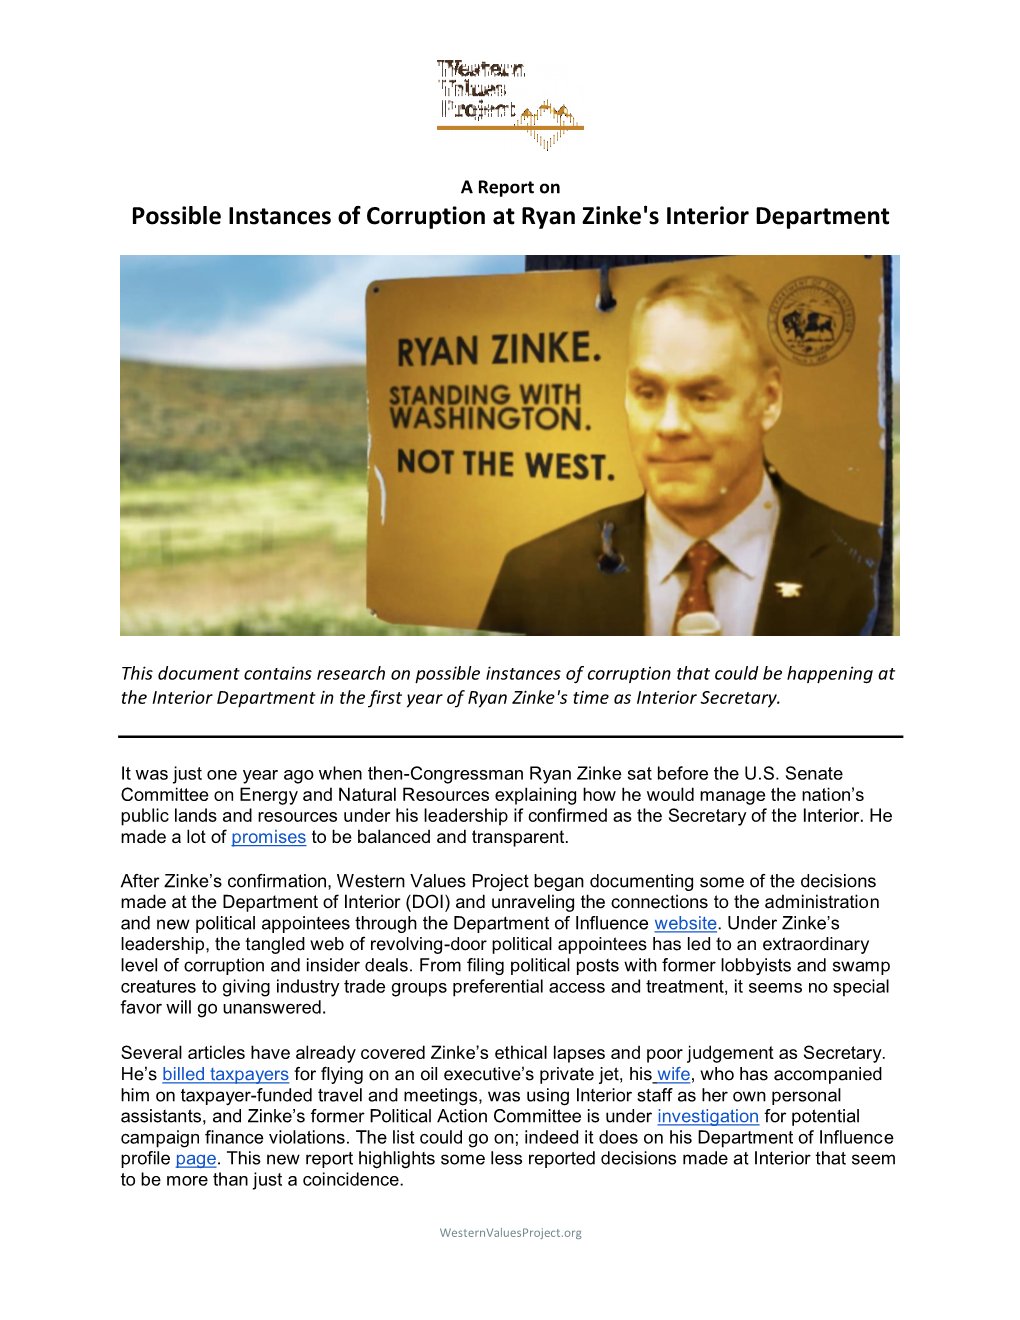 Possible Instances of Corruption at Ryan Zinke's Interior Department